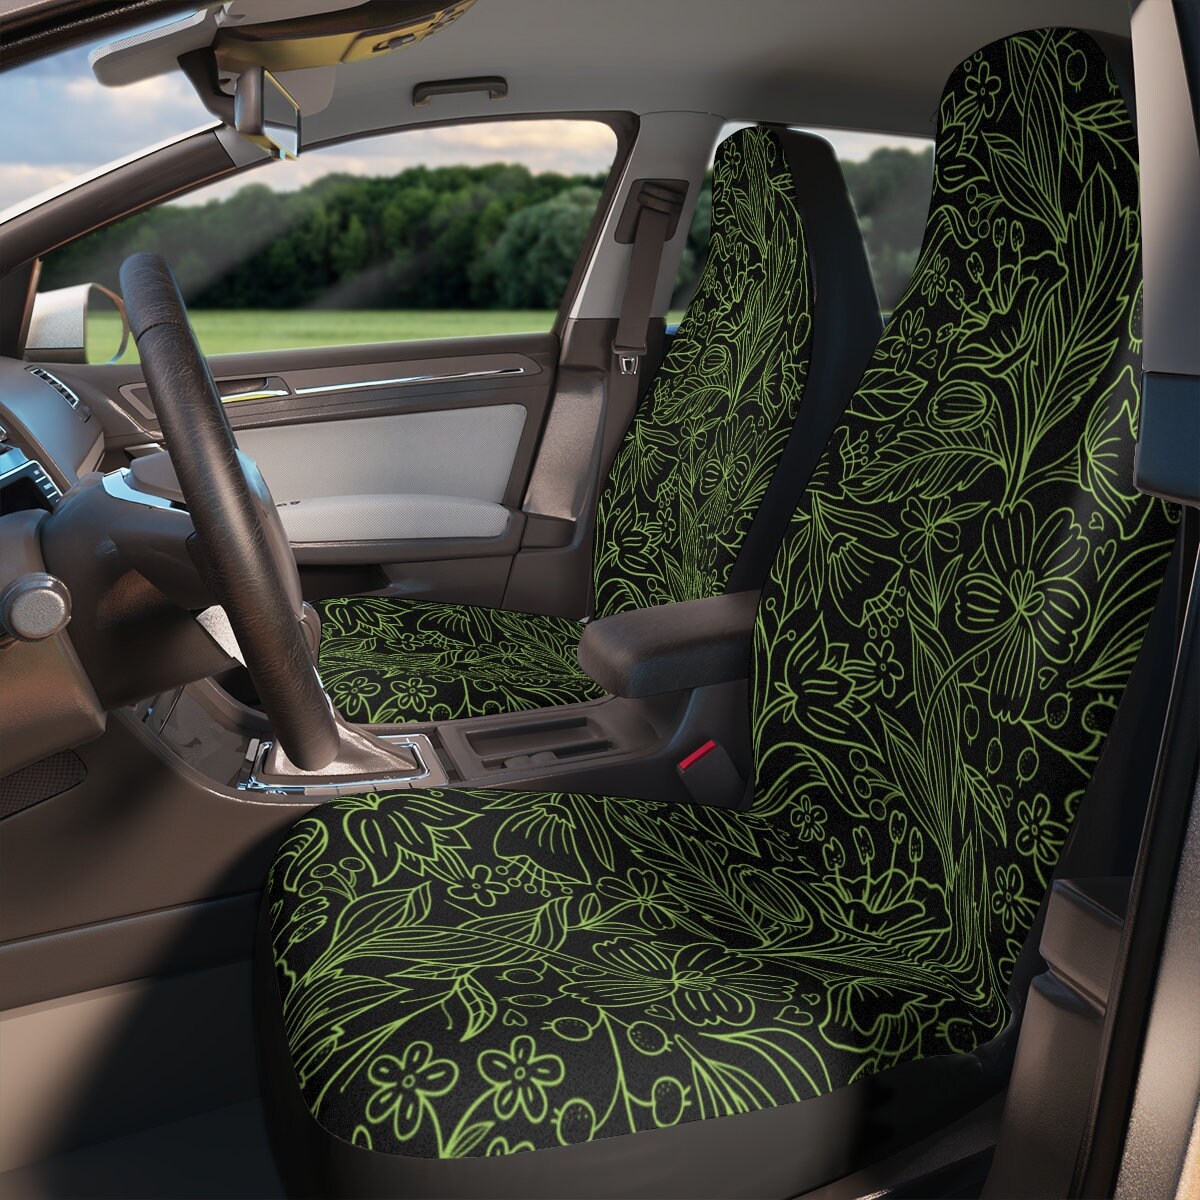 Sage Green Seat Covers for Cars, Boho Car Seat Cover, Car Accessories for Women, Hippie Car Decor, Cottagecore Floral Universal Vehicle Mat